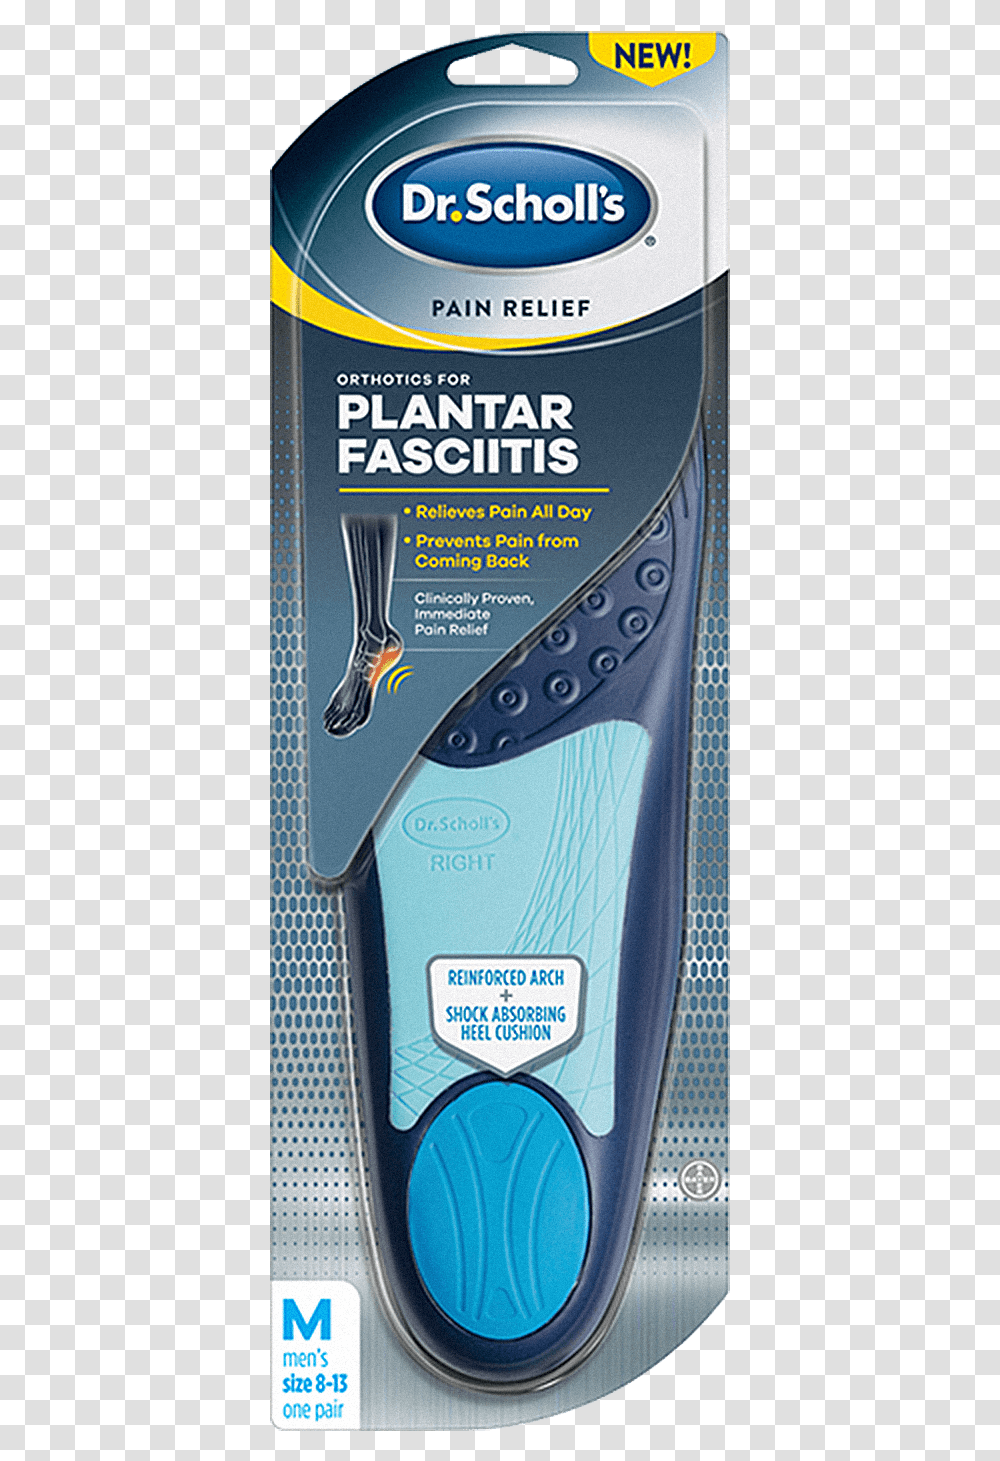 Dr Scholl's Pain Relief Orthotics For Plantar Fasciitis, Fork, Cutlery, Poster, Advertisement Transparent Png